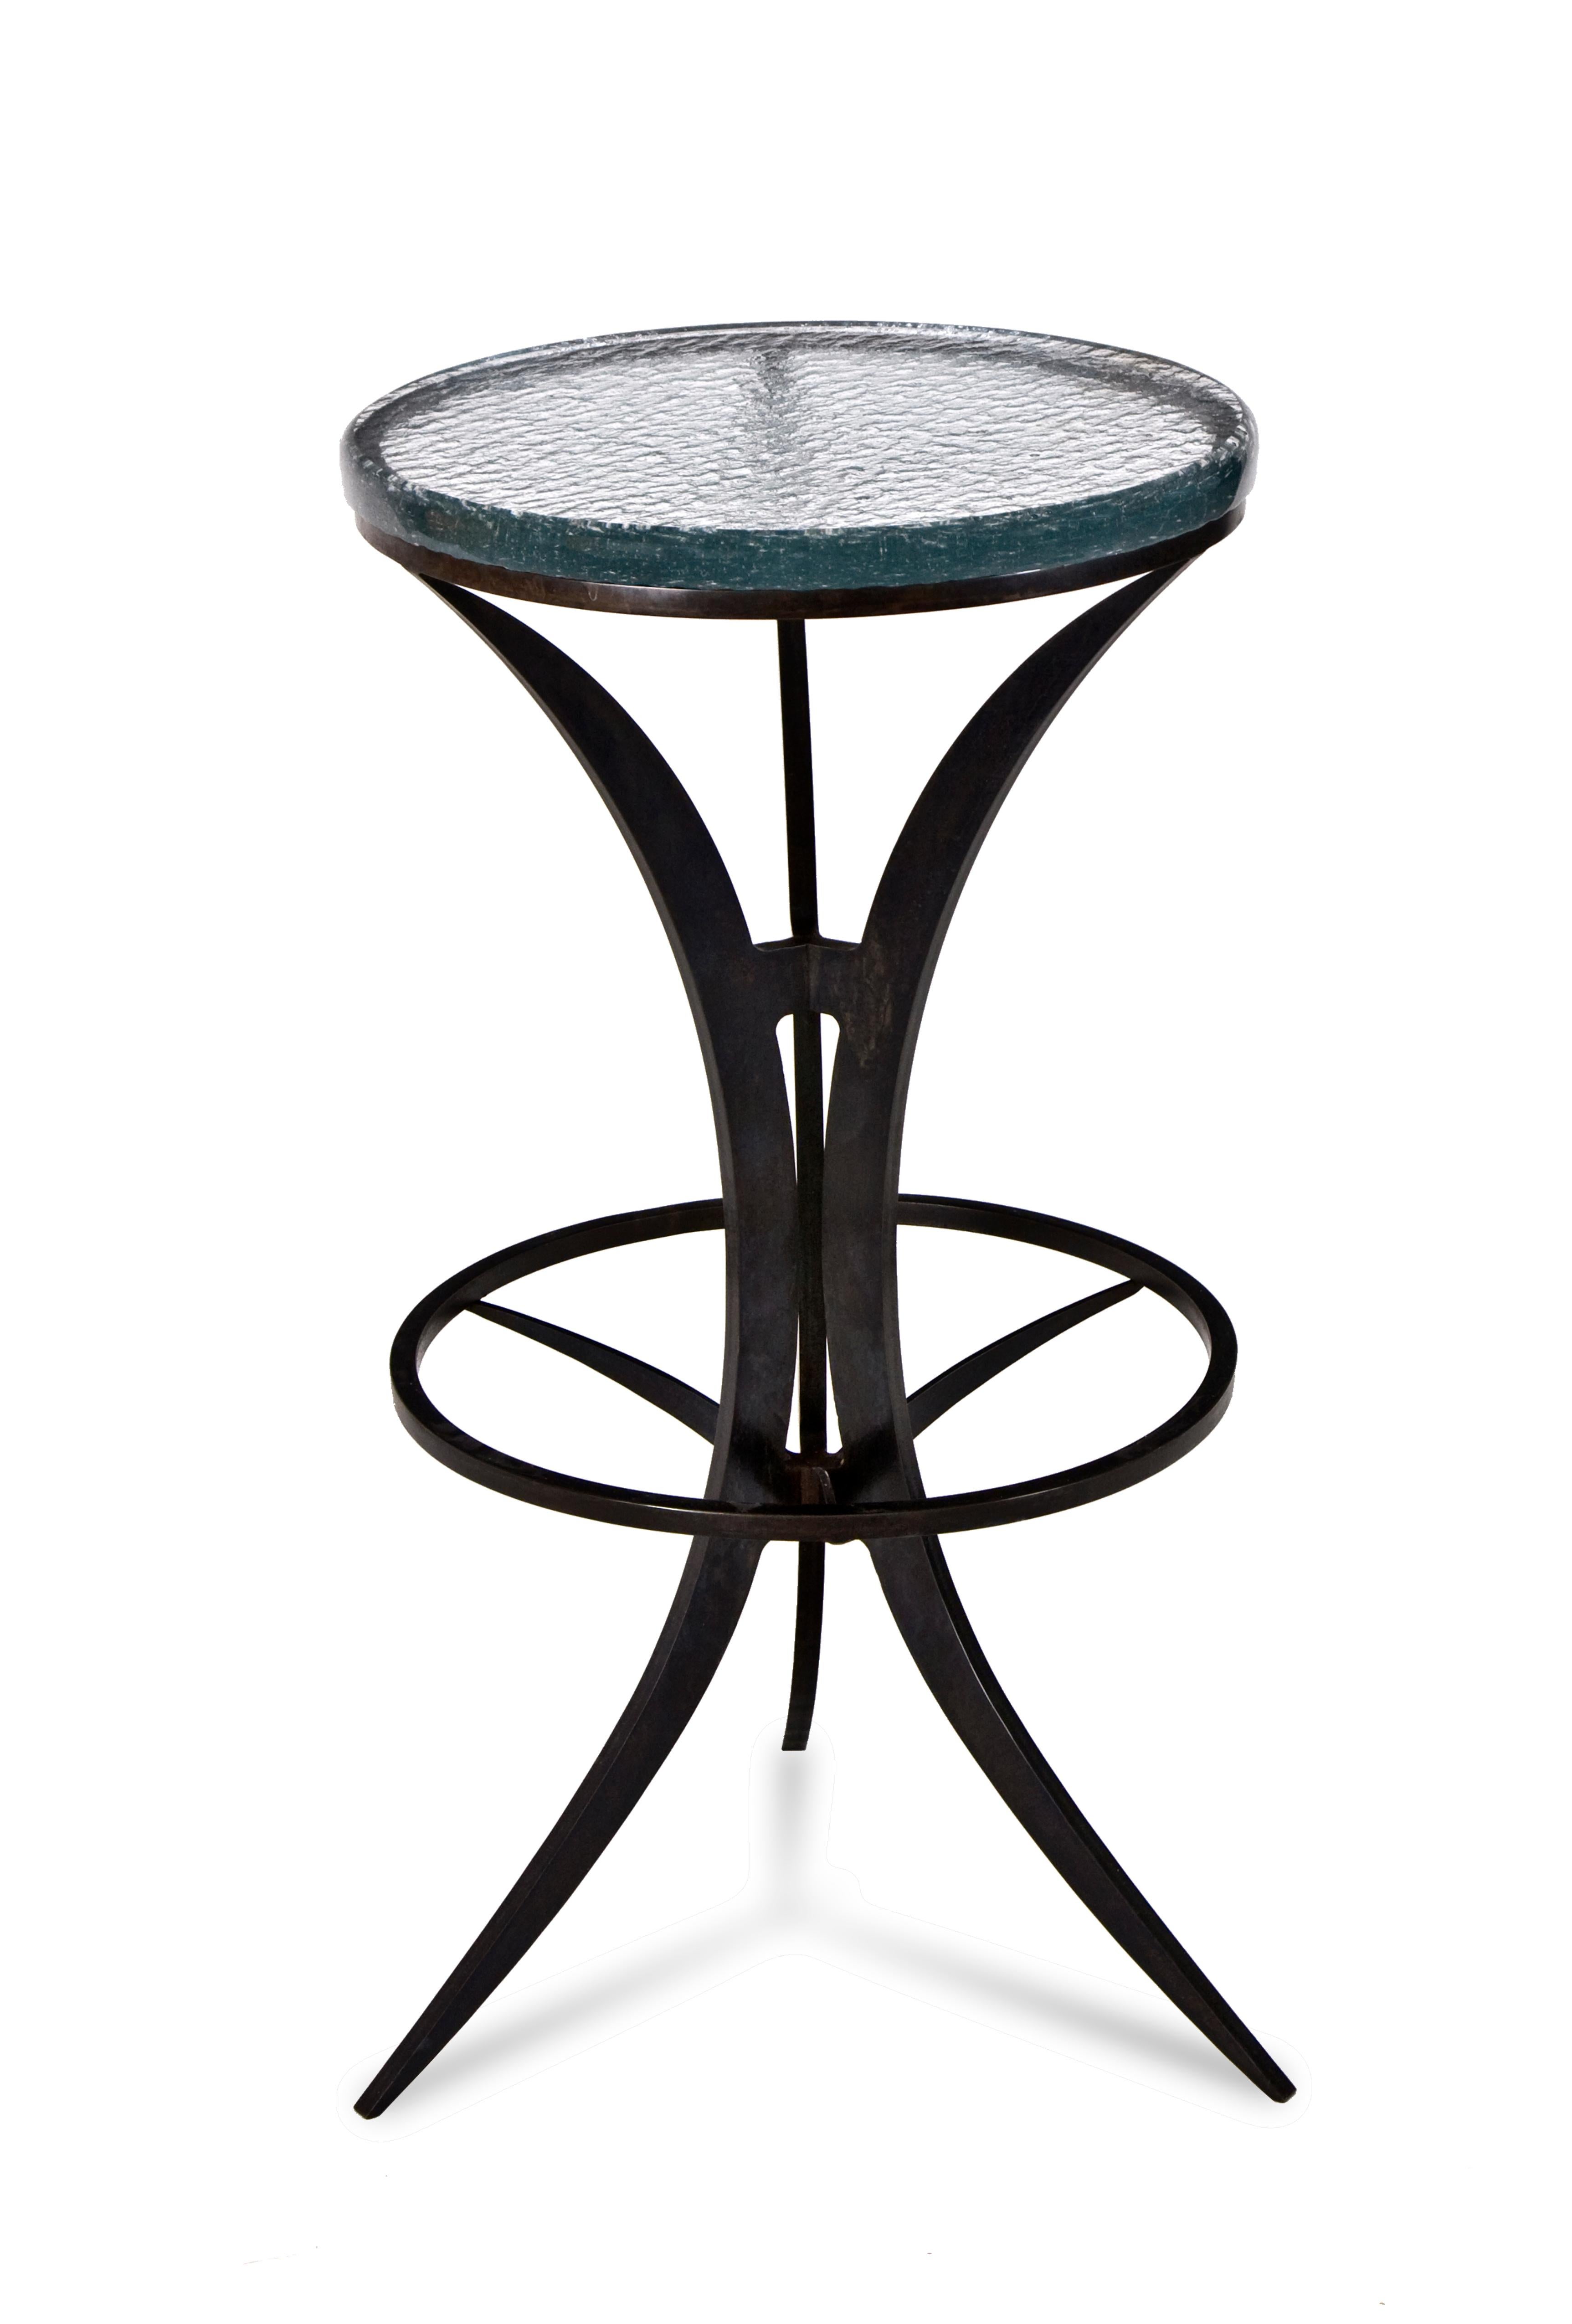 Martini bar stool
Stool as pictured, available now, 25% off. 

New production options:
Stool Options: Silver or Blackened steel base
Seat options: Upholstered, glass or wood

  